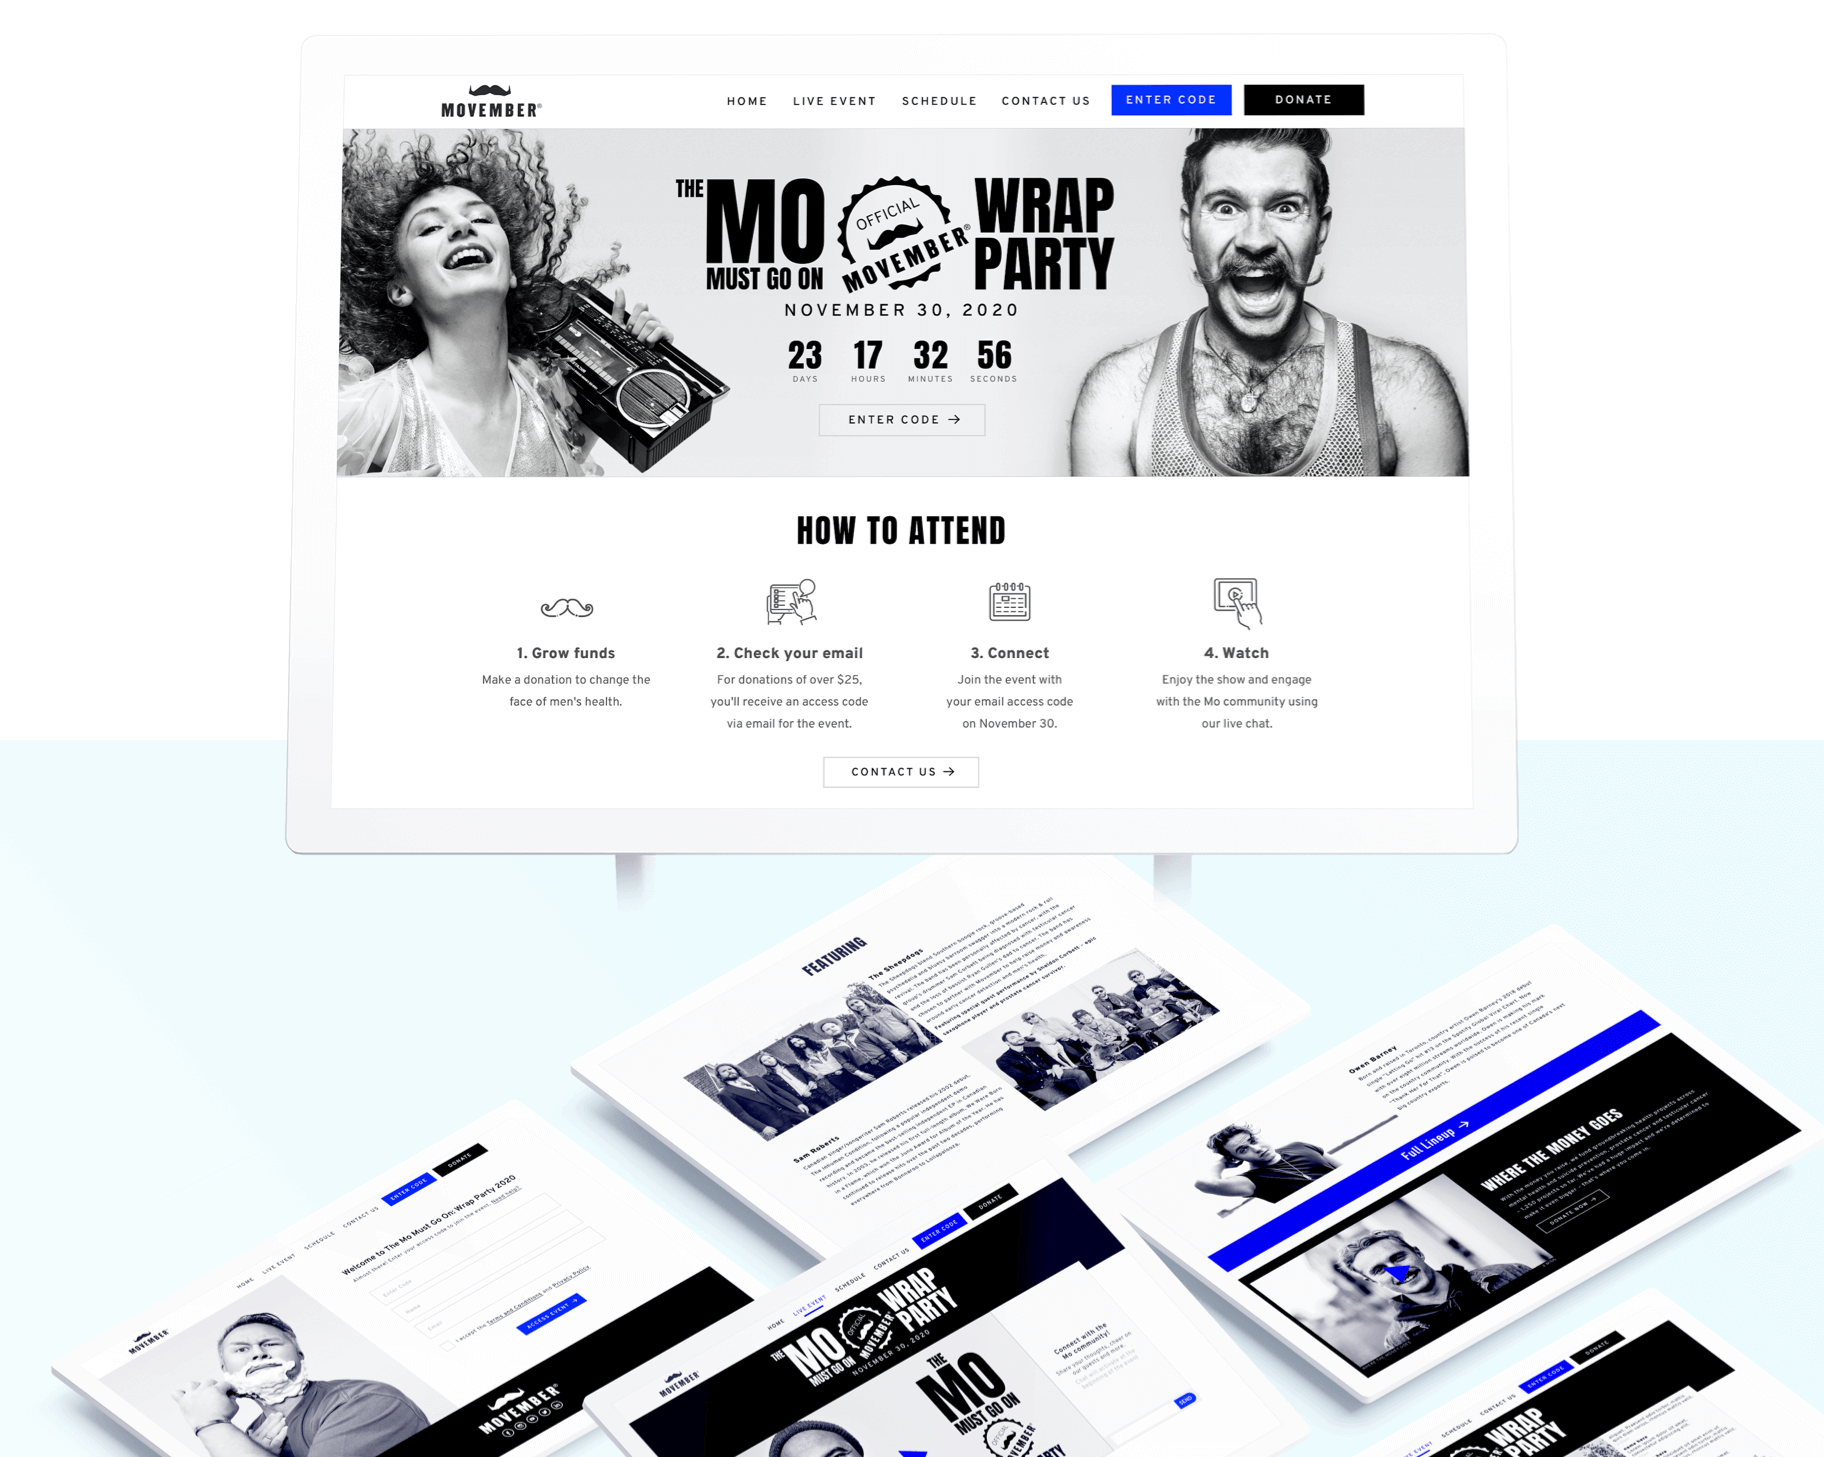 Website for Movember wrap party campaign that Elite Digital developed.